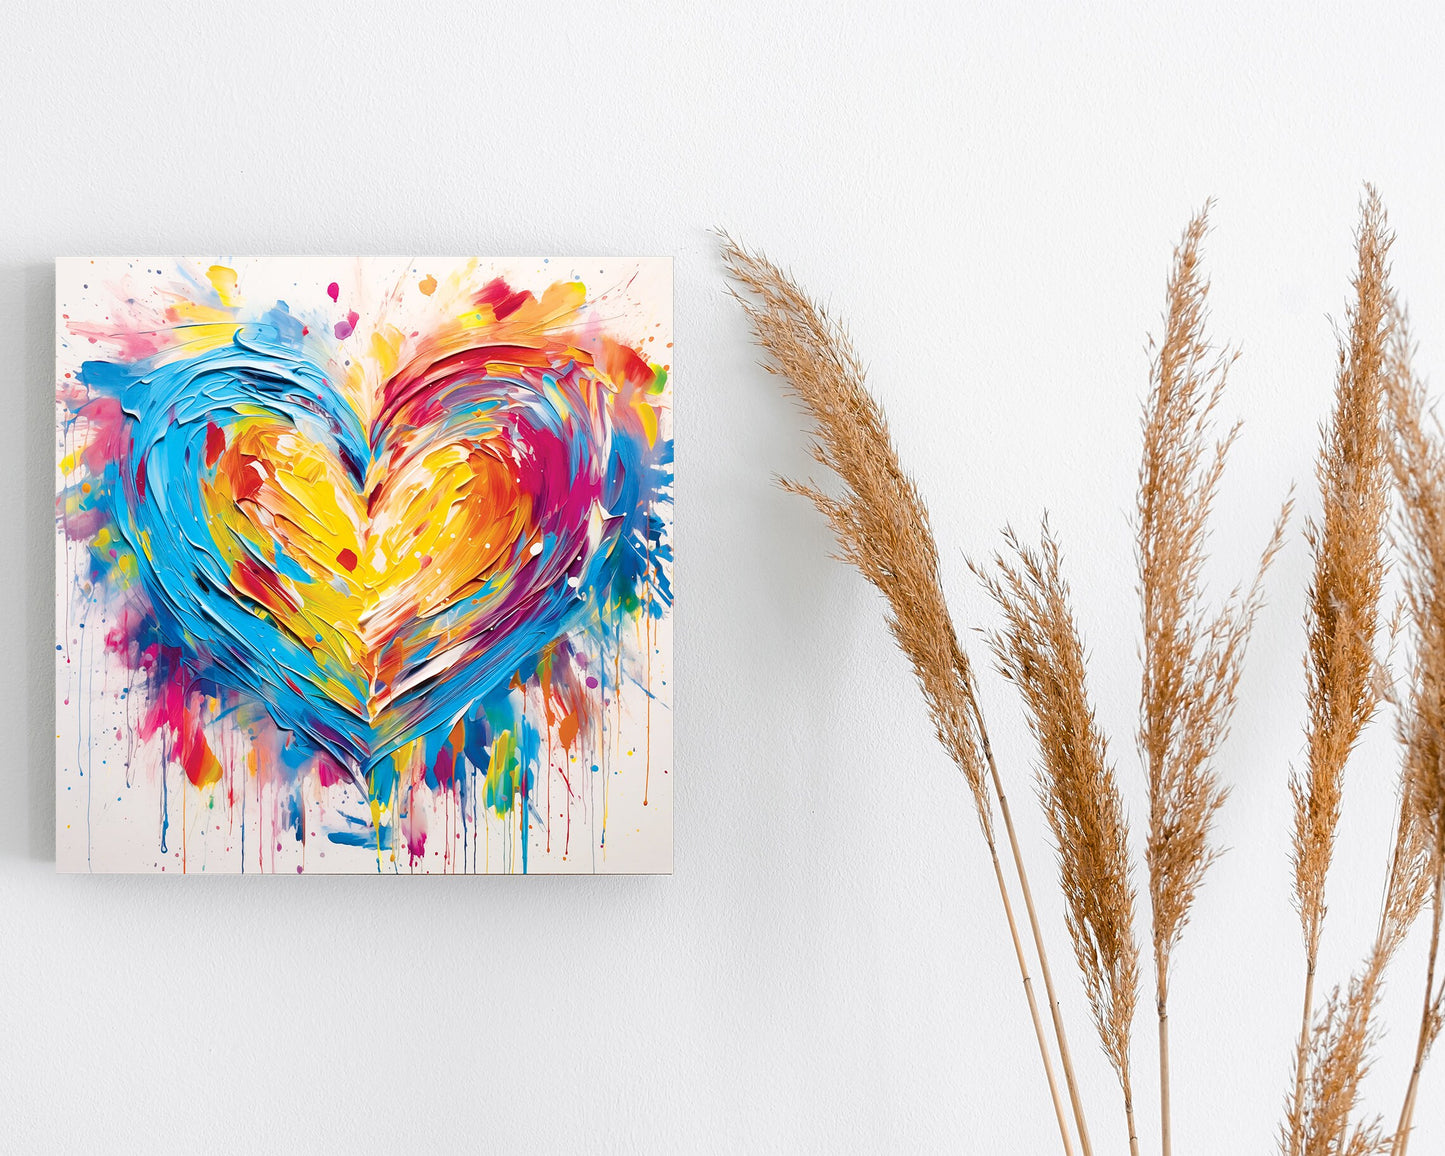 12in Oil Painting Style of a Colorful Heart Valentine__ Day Wall Canvas UV Print Wall Decor, Ideal for Entryway, Mantle, Living Room